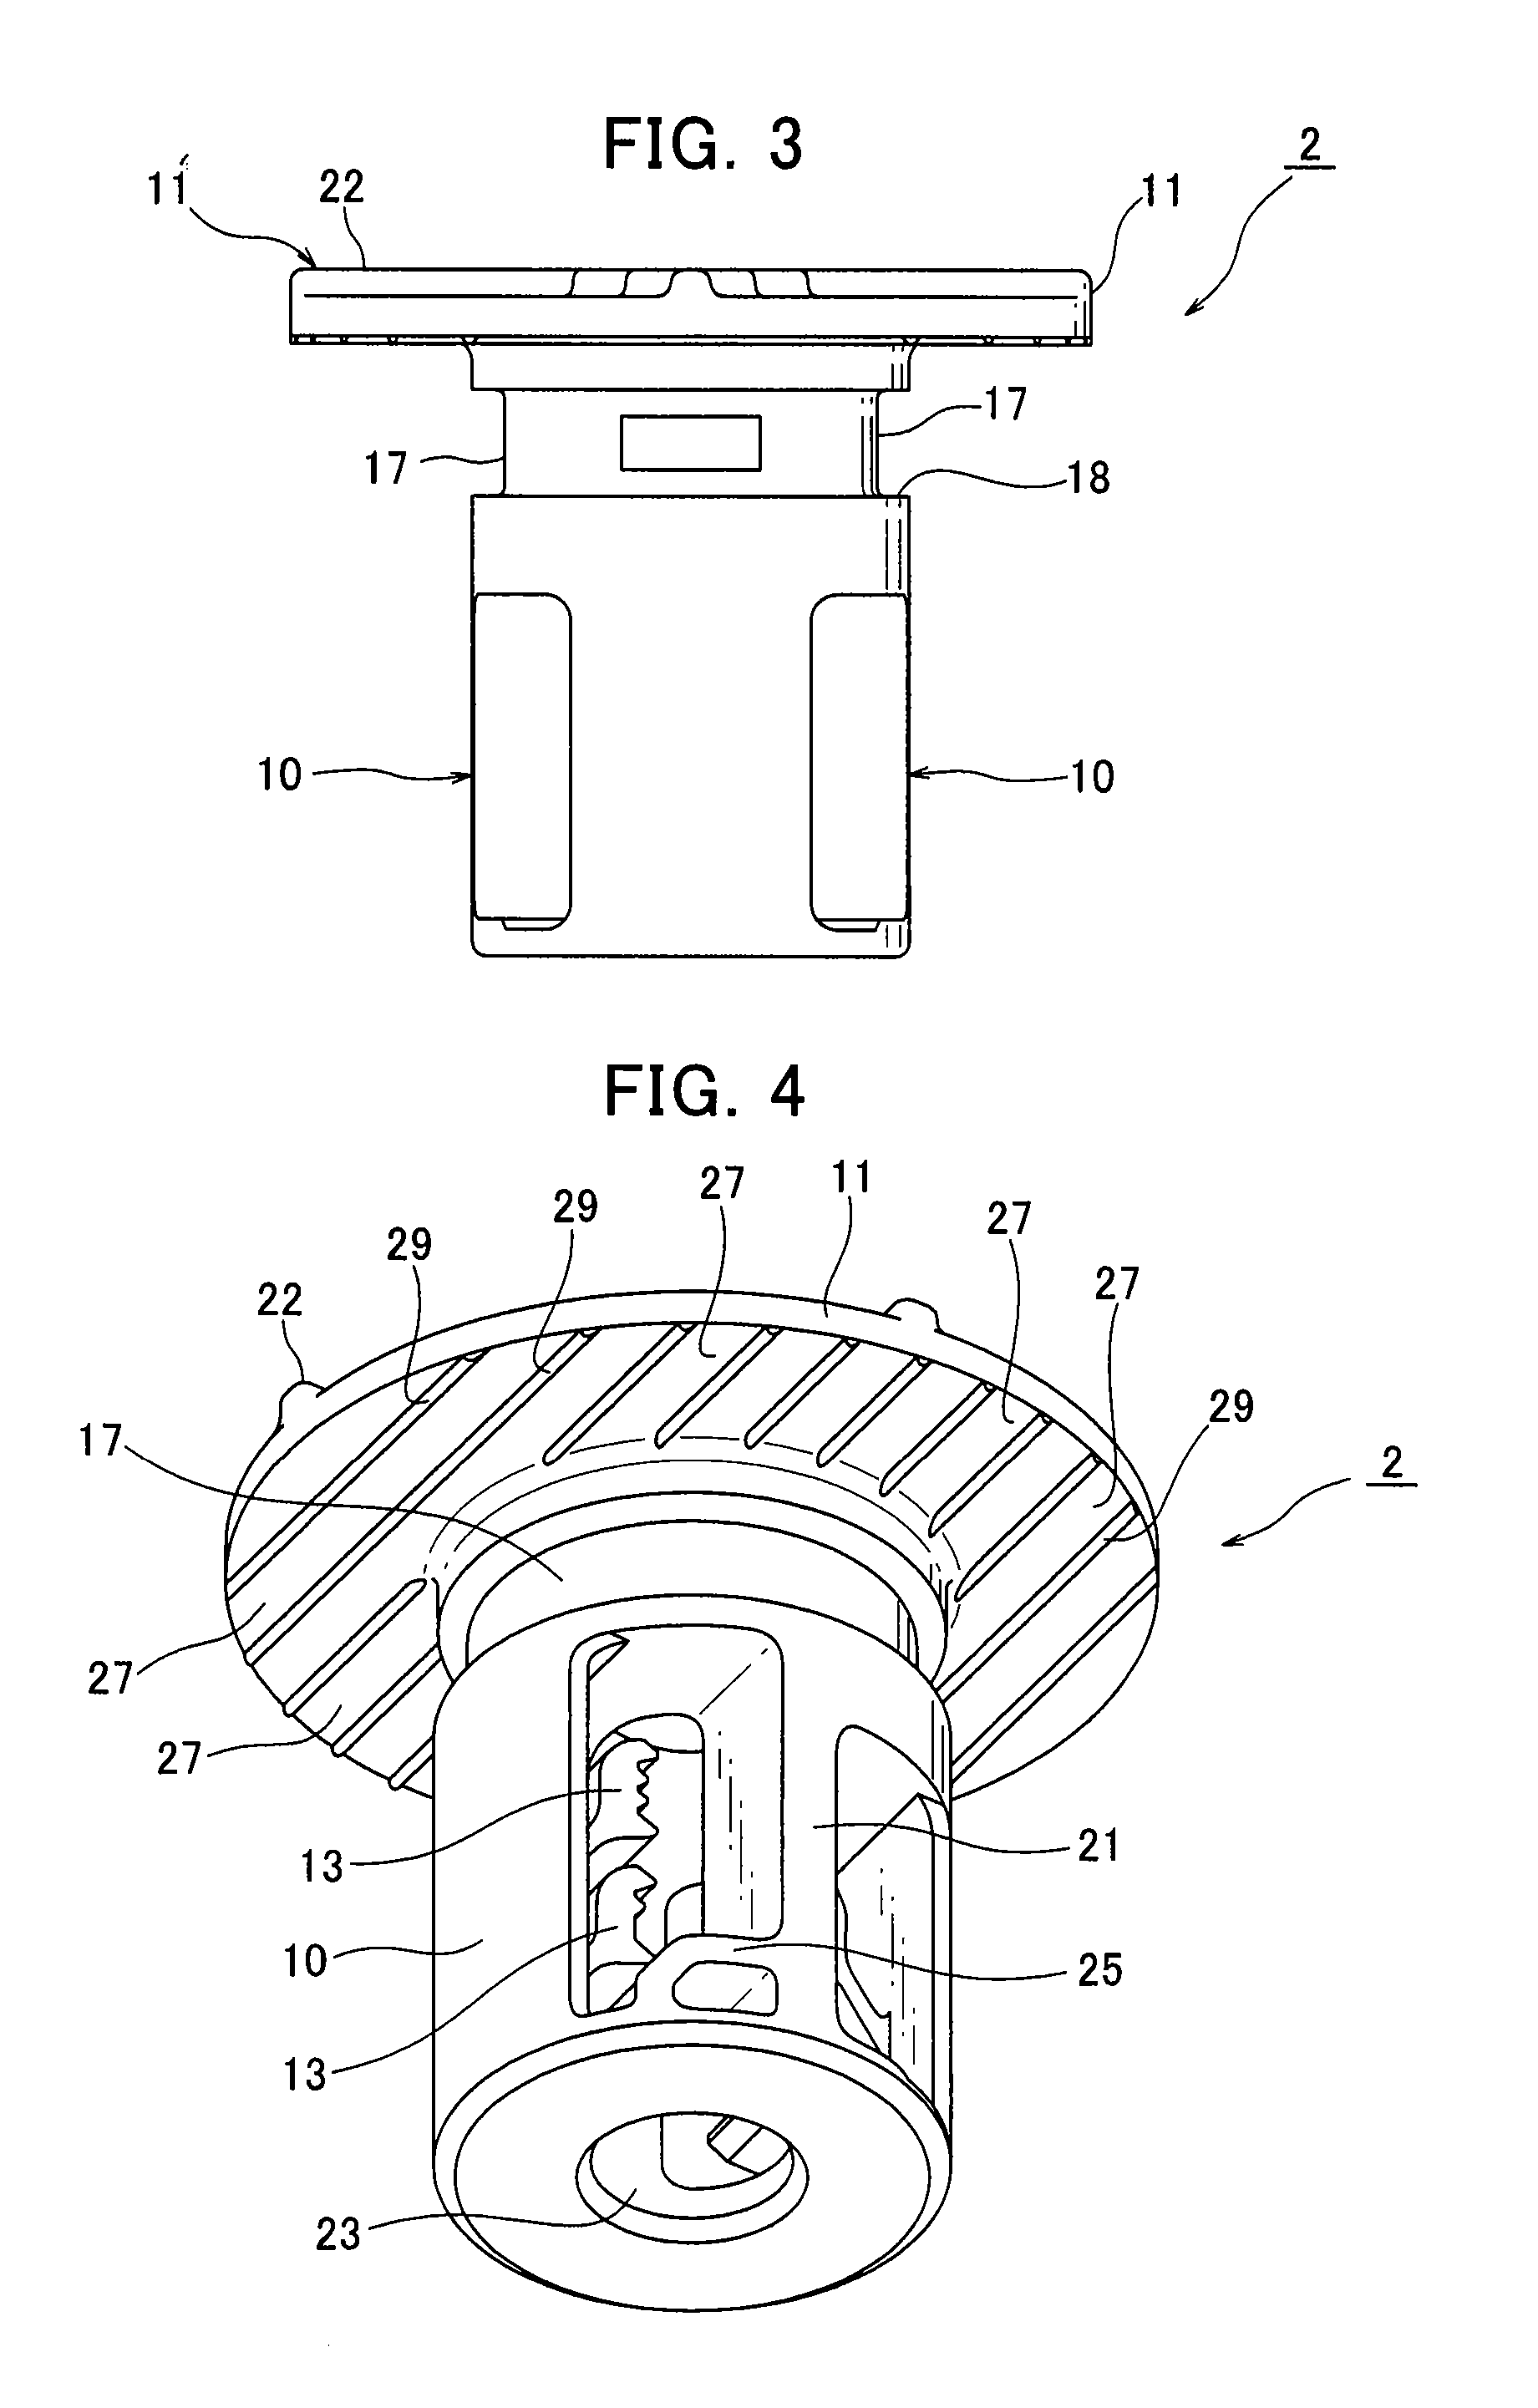 Fasteners for clamping sheet-form members, and apparatus and method using such fasteners to attach undercover onto underside of vehicle floor panel